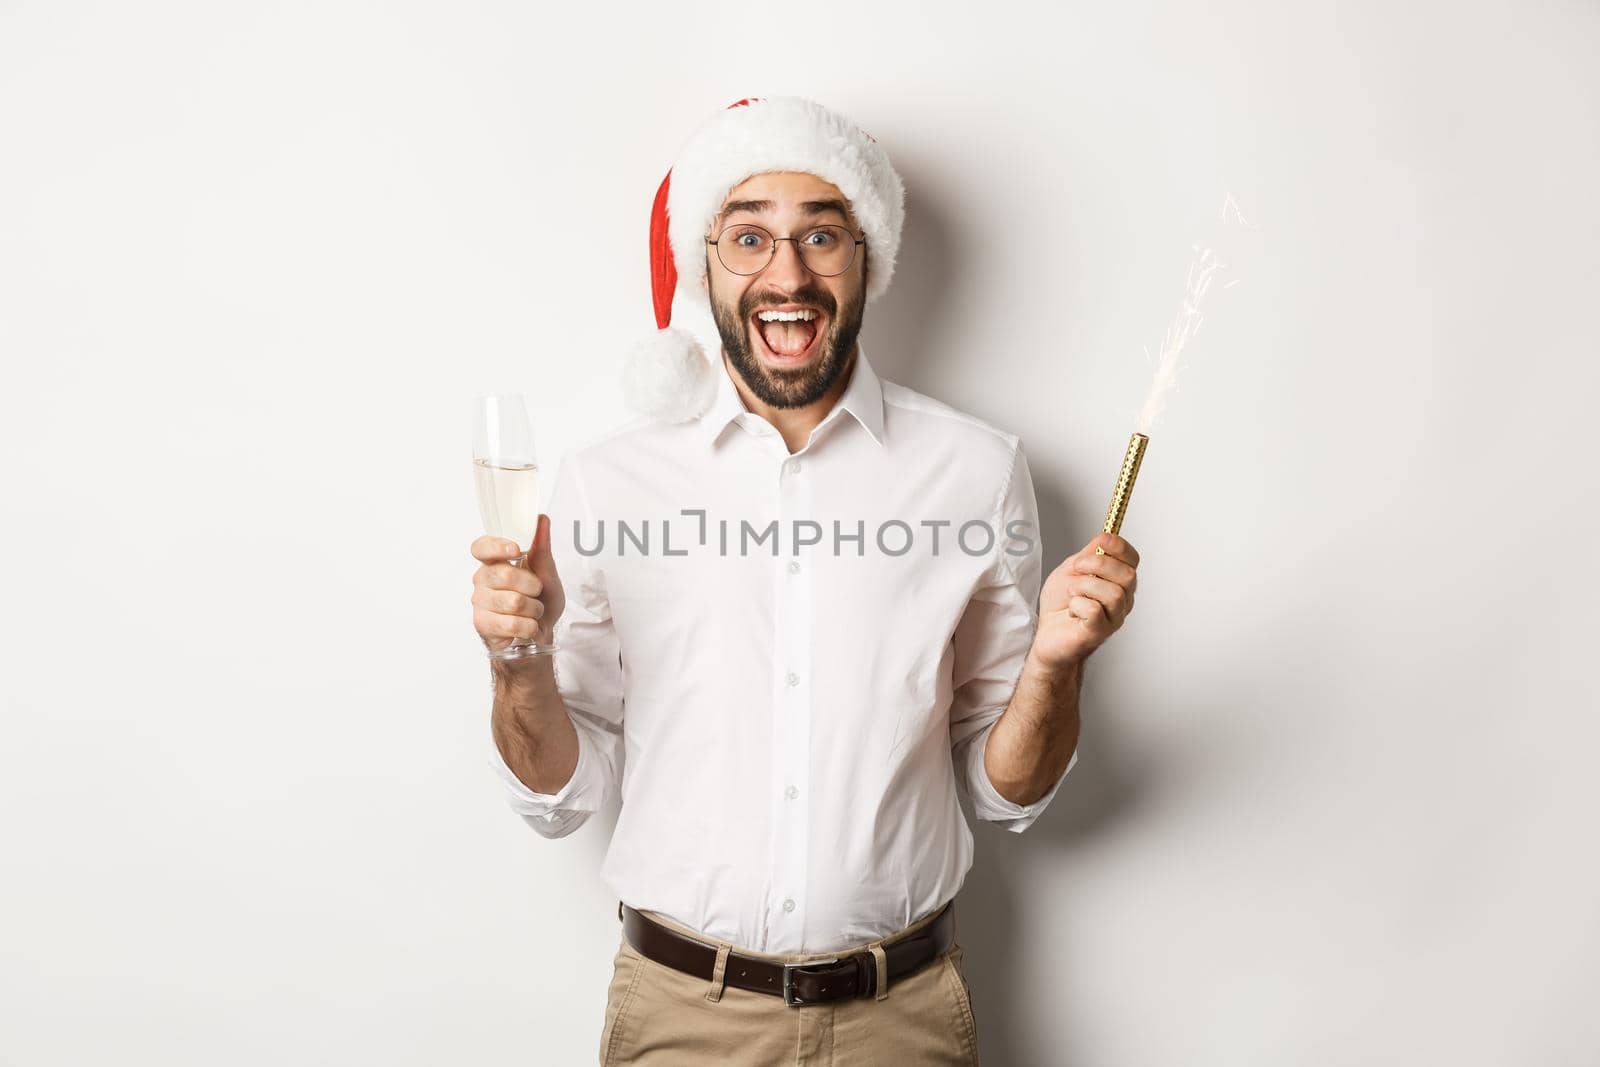 Winter holidays and celebration. Happy guy in Santa hat rejoicing at New Year party, drinking champagne and shouting of joy, white background.